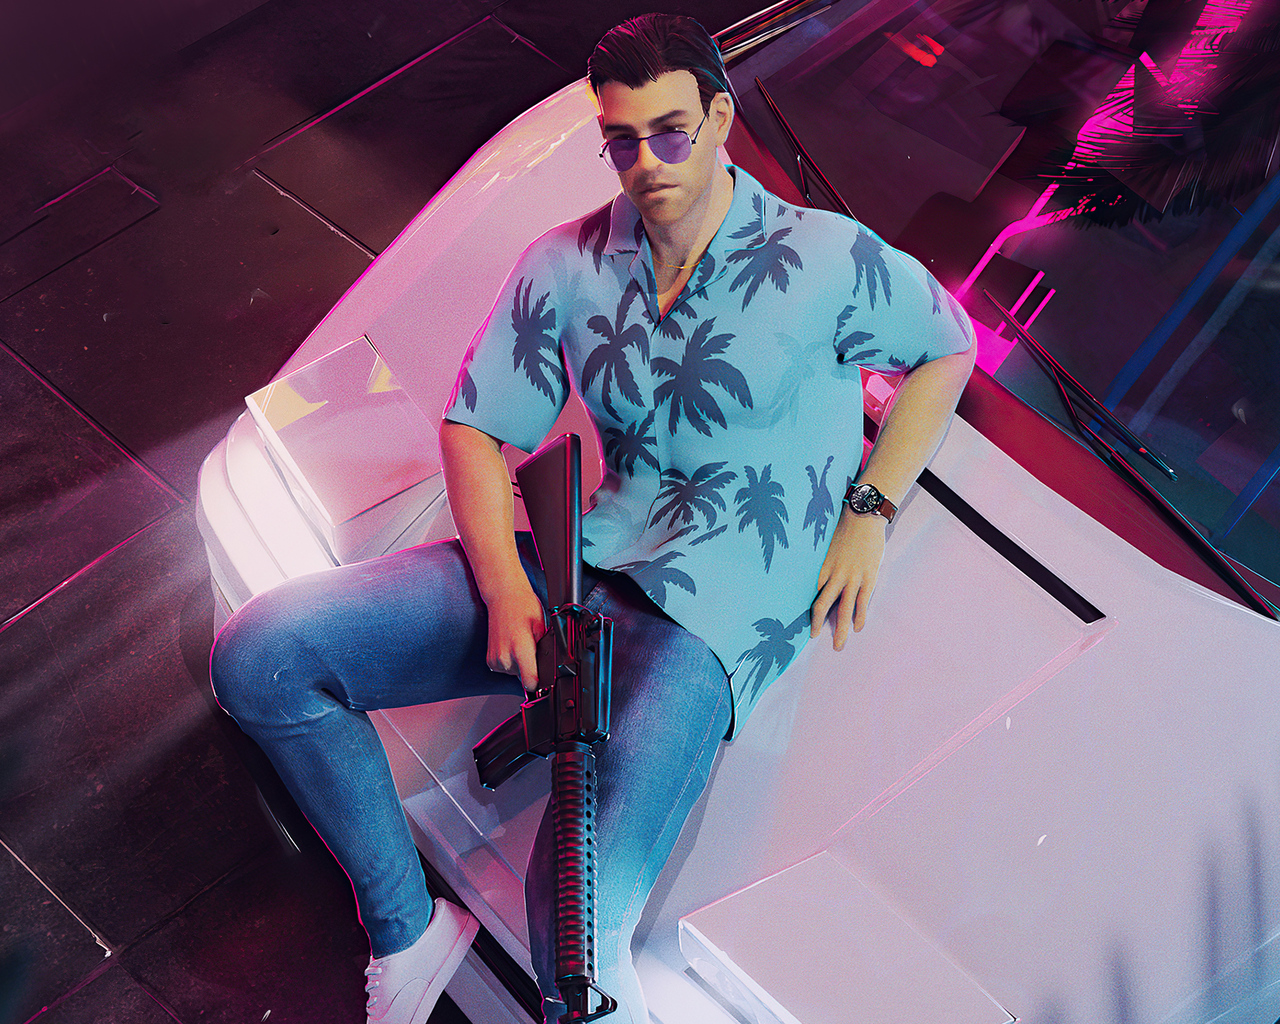 Tommy Vercetti Gta Vice City 1280x1024 Resolution HD 4k Wallpaper, Image, Background, Photo and Picture